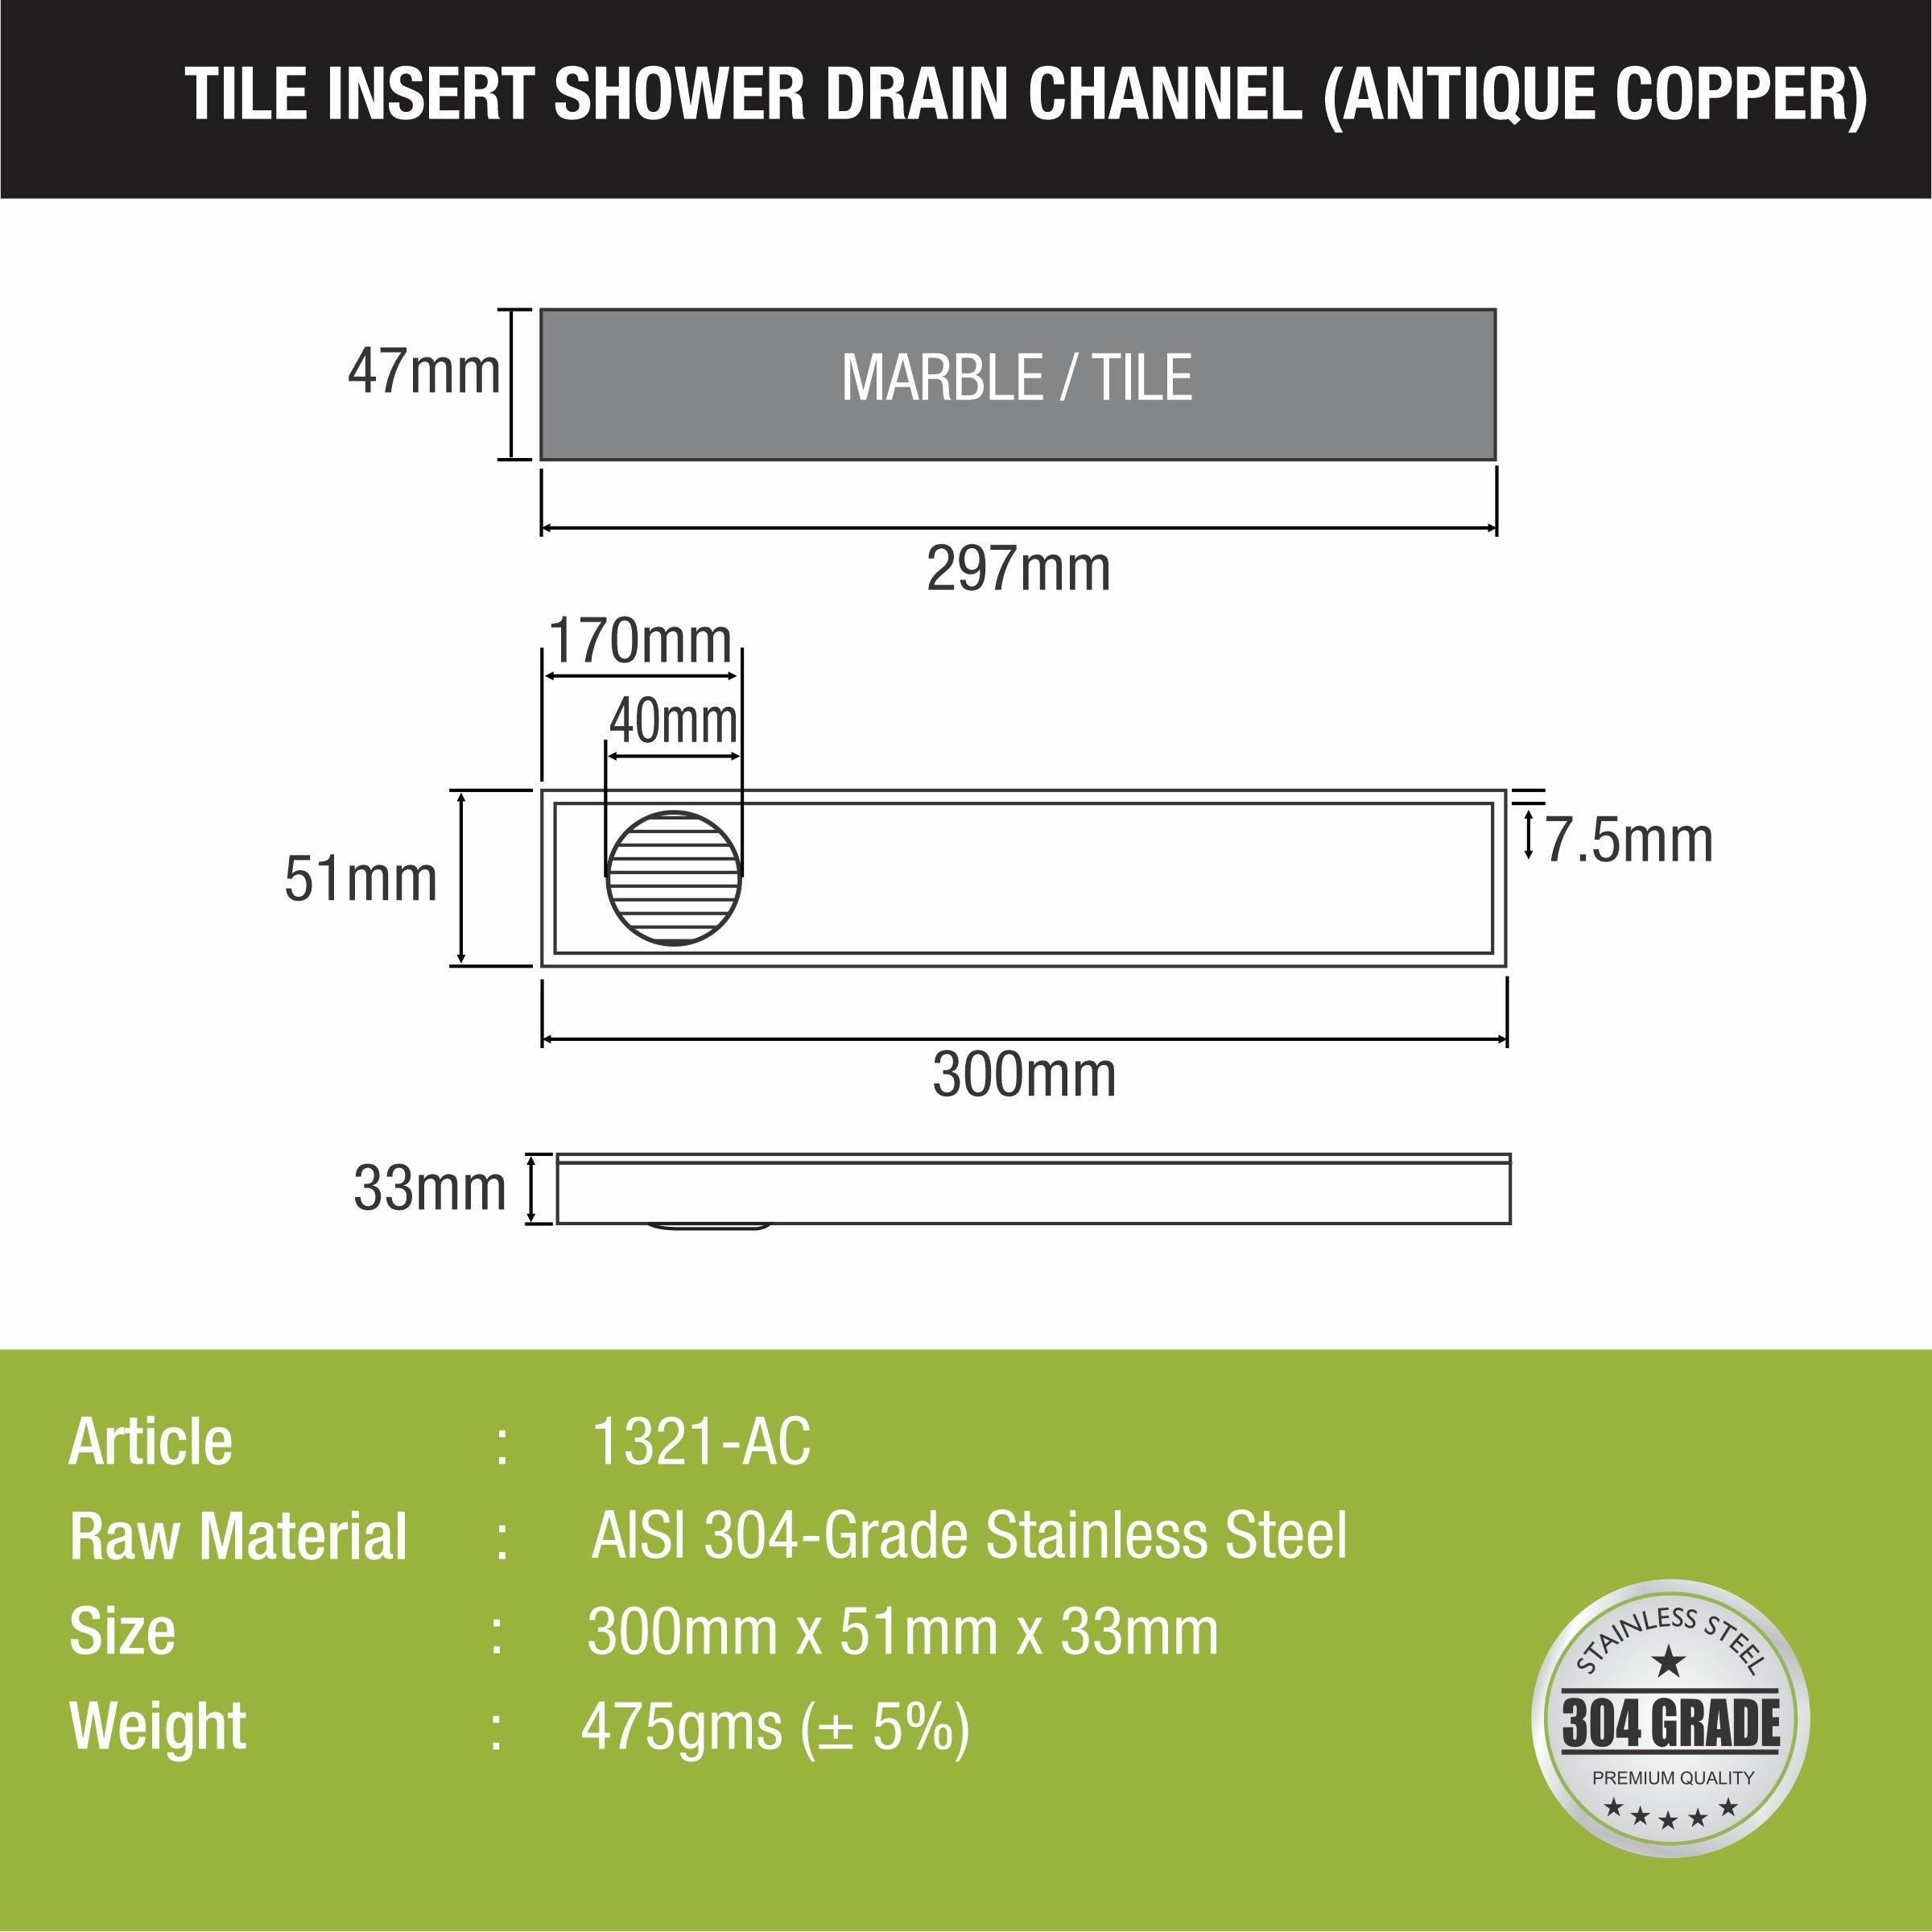 Tile Insert Shower Drain Channel - Antique Copper (12 x 2 Inches) sizes and dimensions